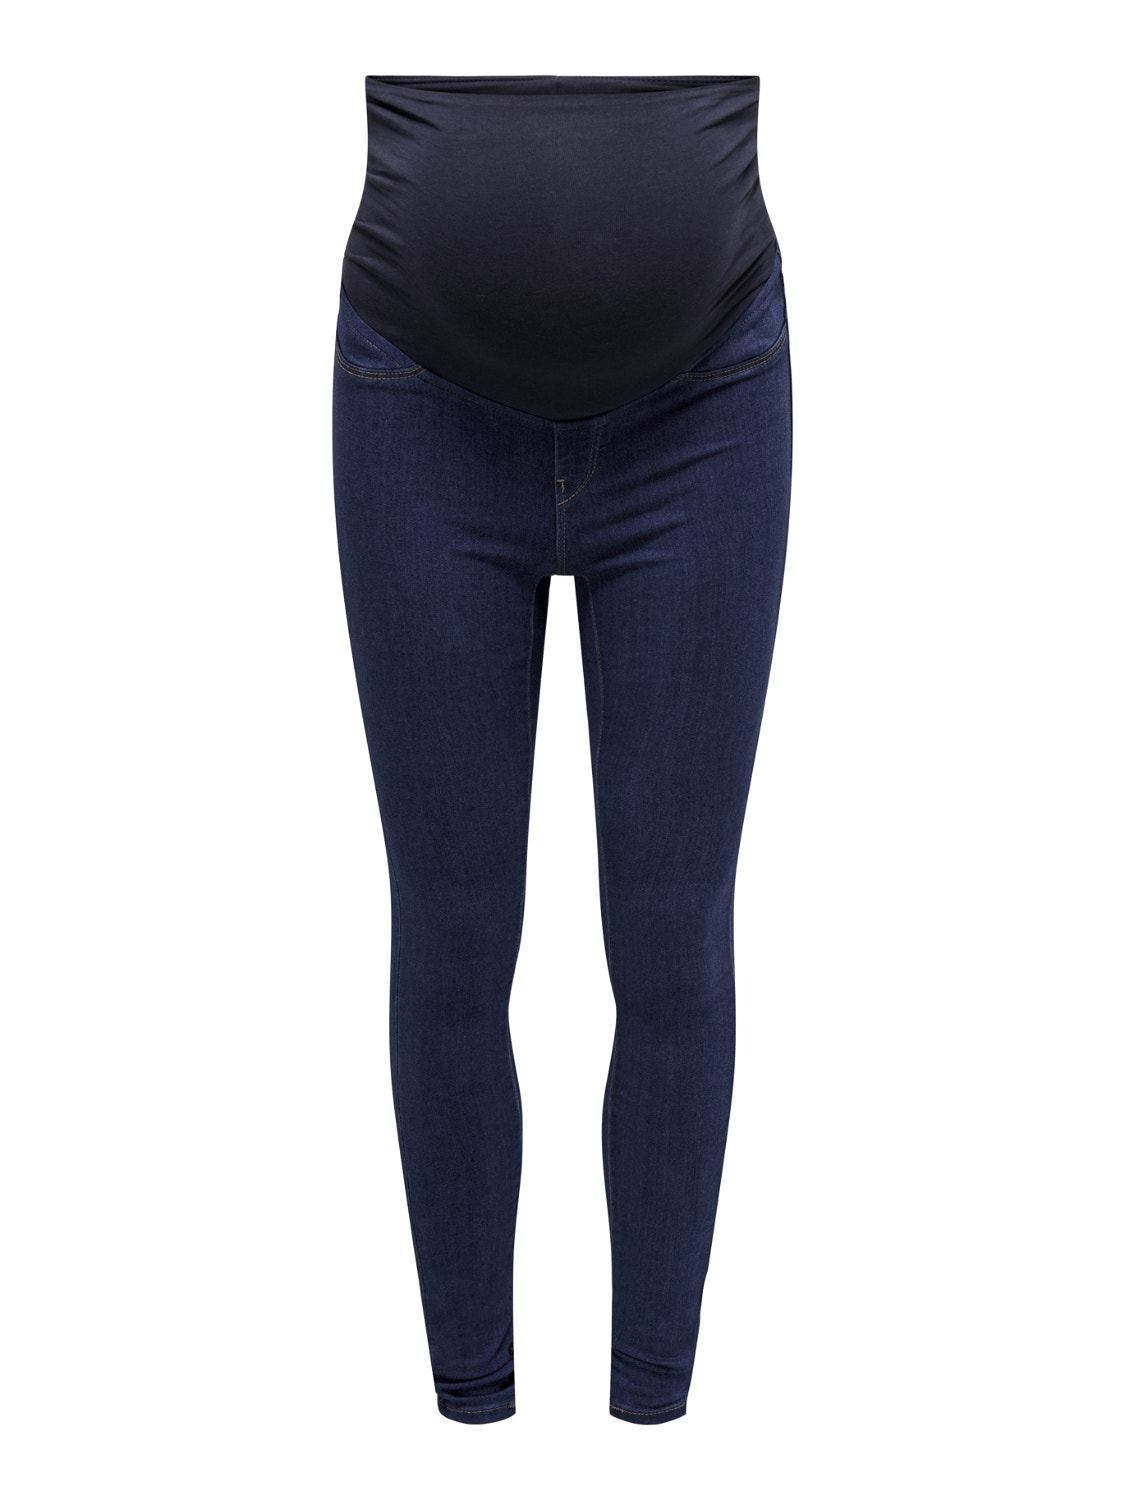 https://images.only.com/15255012/3861262/001/only-olmrainregskinnyjeggings-blue.jpg?v=0e552e862d8c3c83dcbf2b76652d816c&format=webp&width=1280&quality=90&key=25-0-3